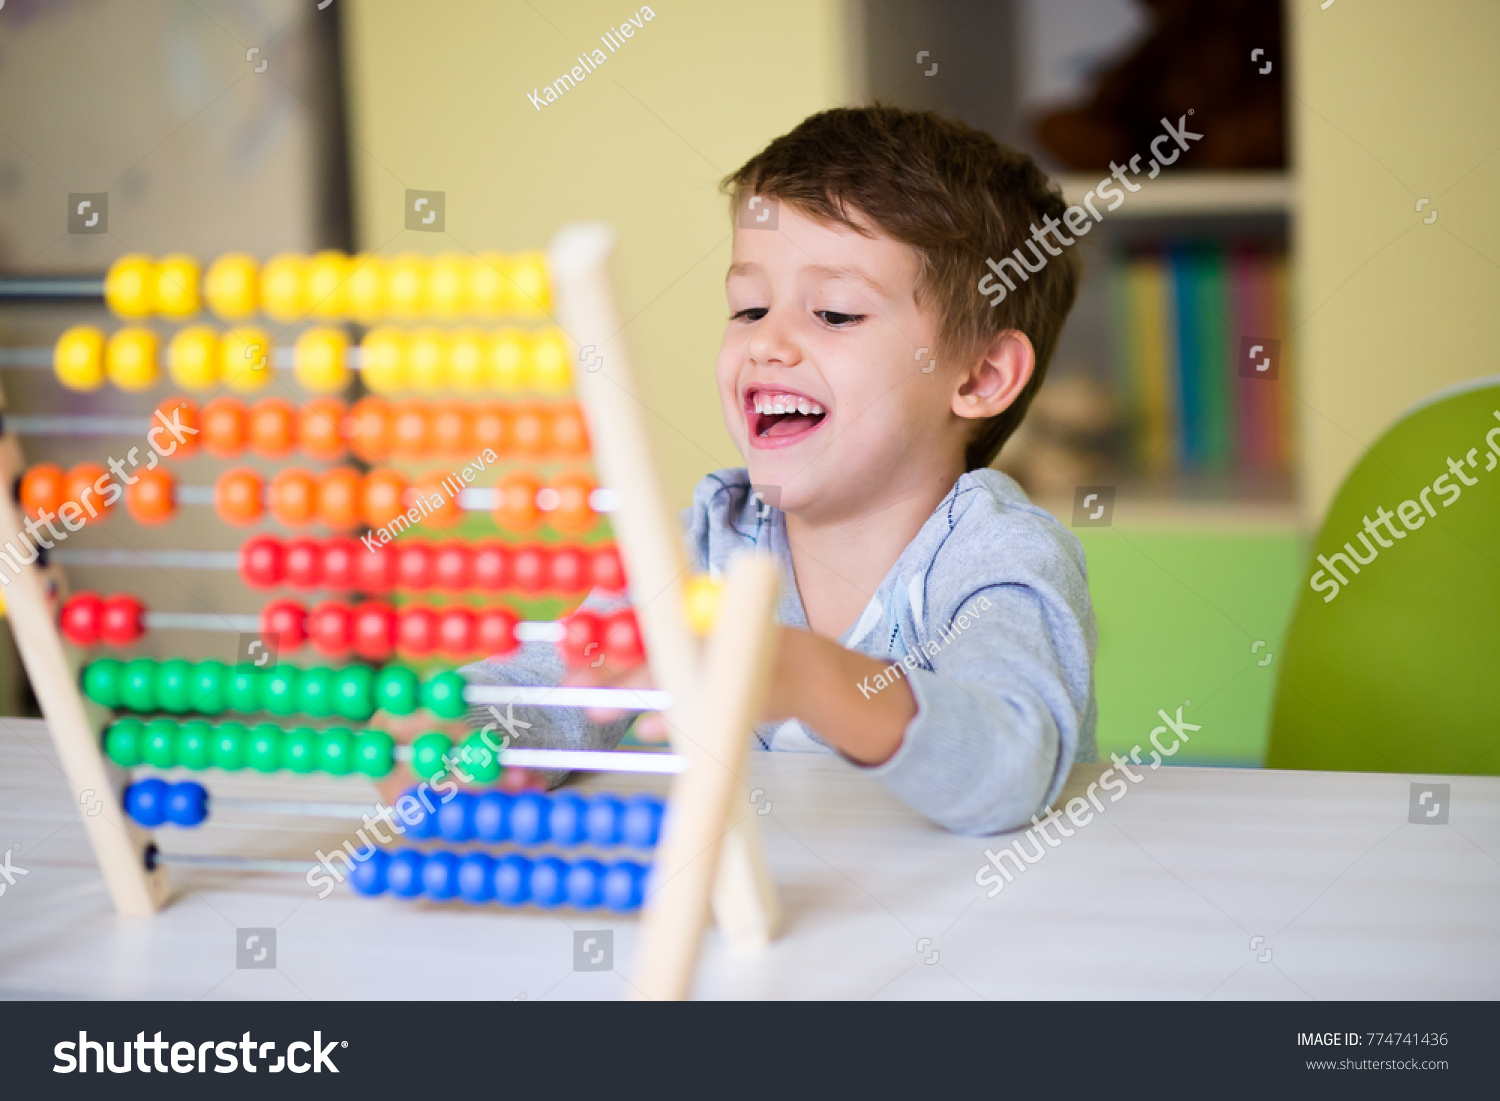 Happy kid playing with abacus toy at kindergarten. Adorable smart child learning to count. Early kids development. #774741436